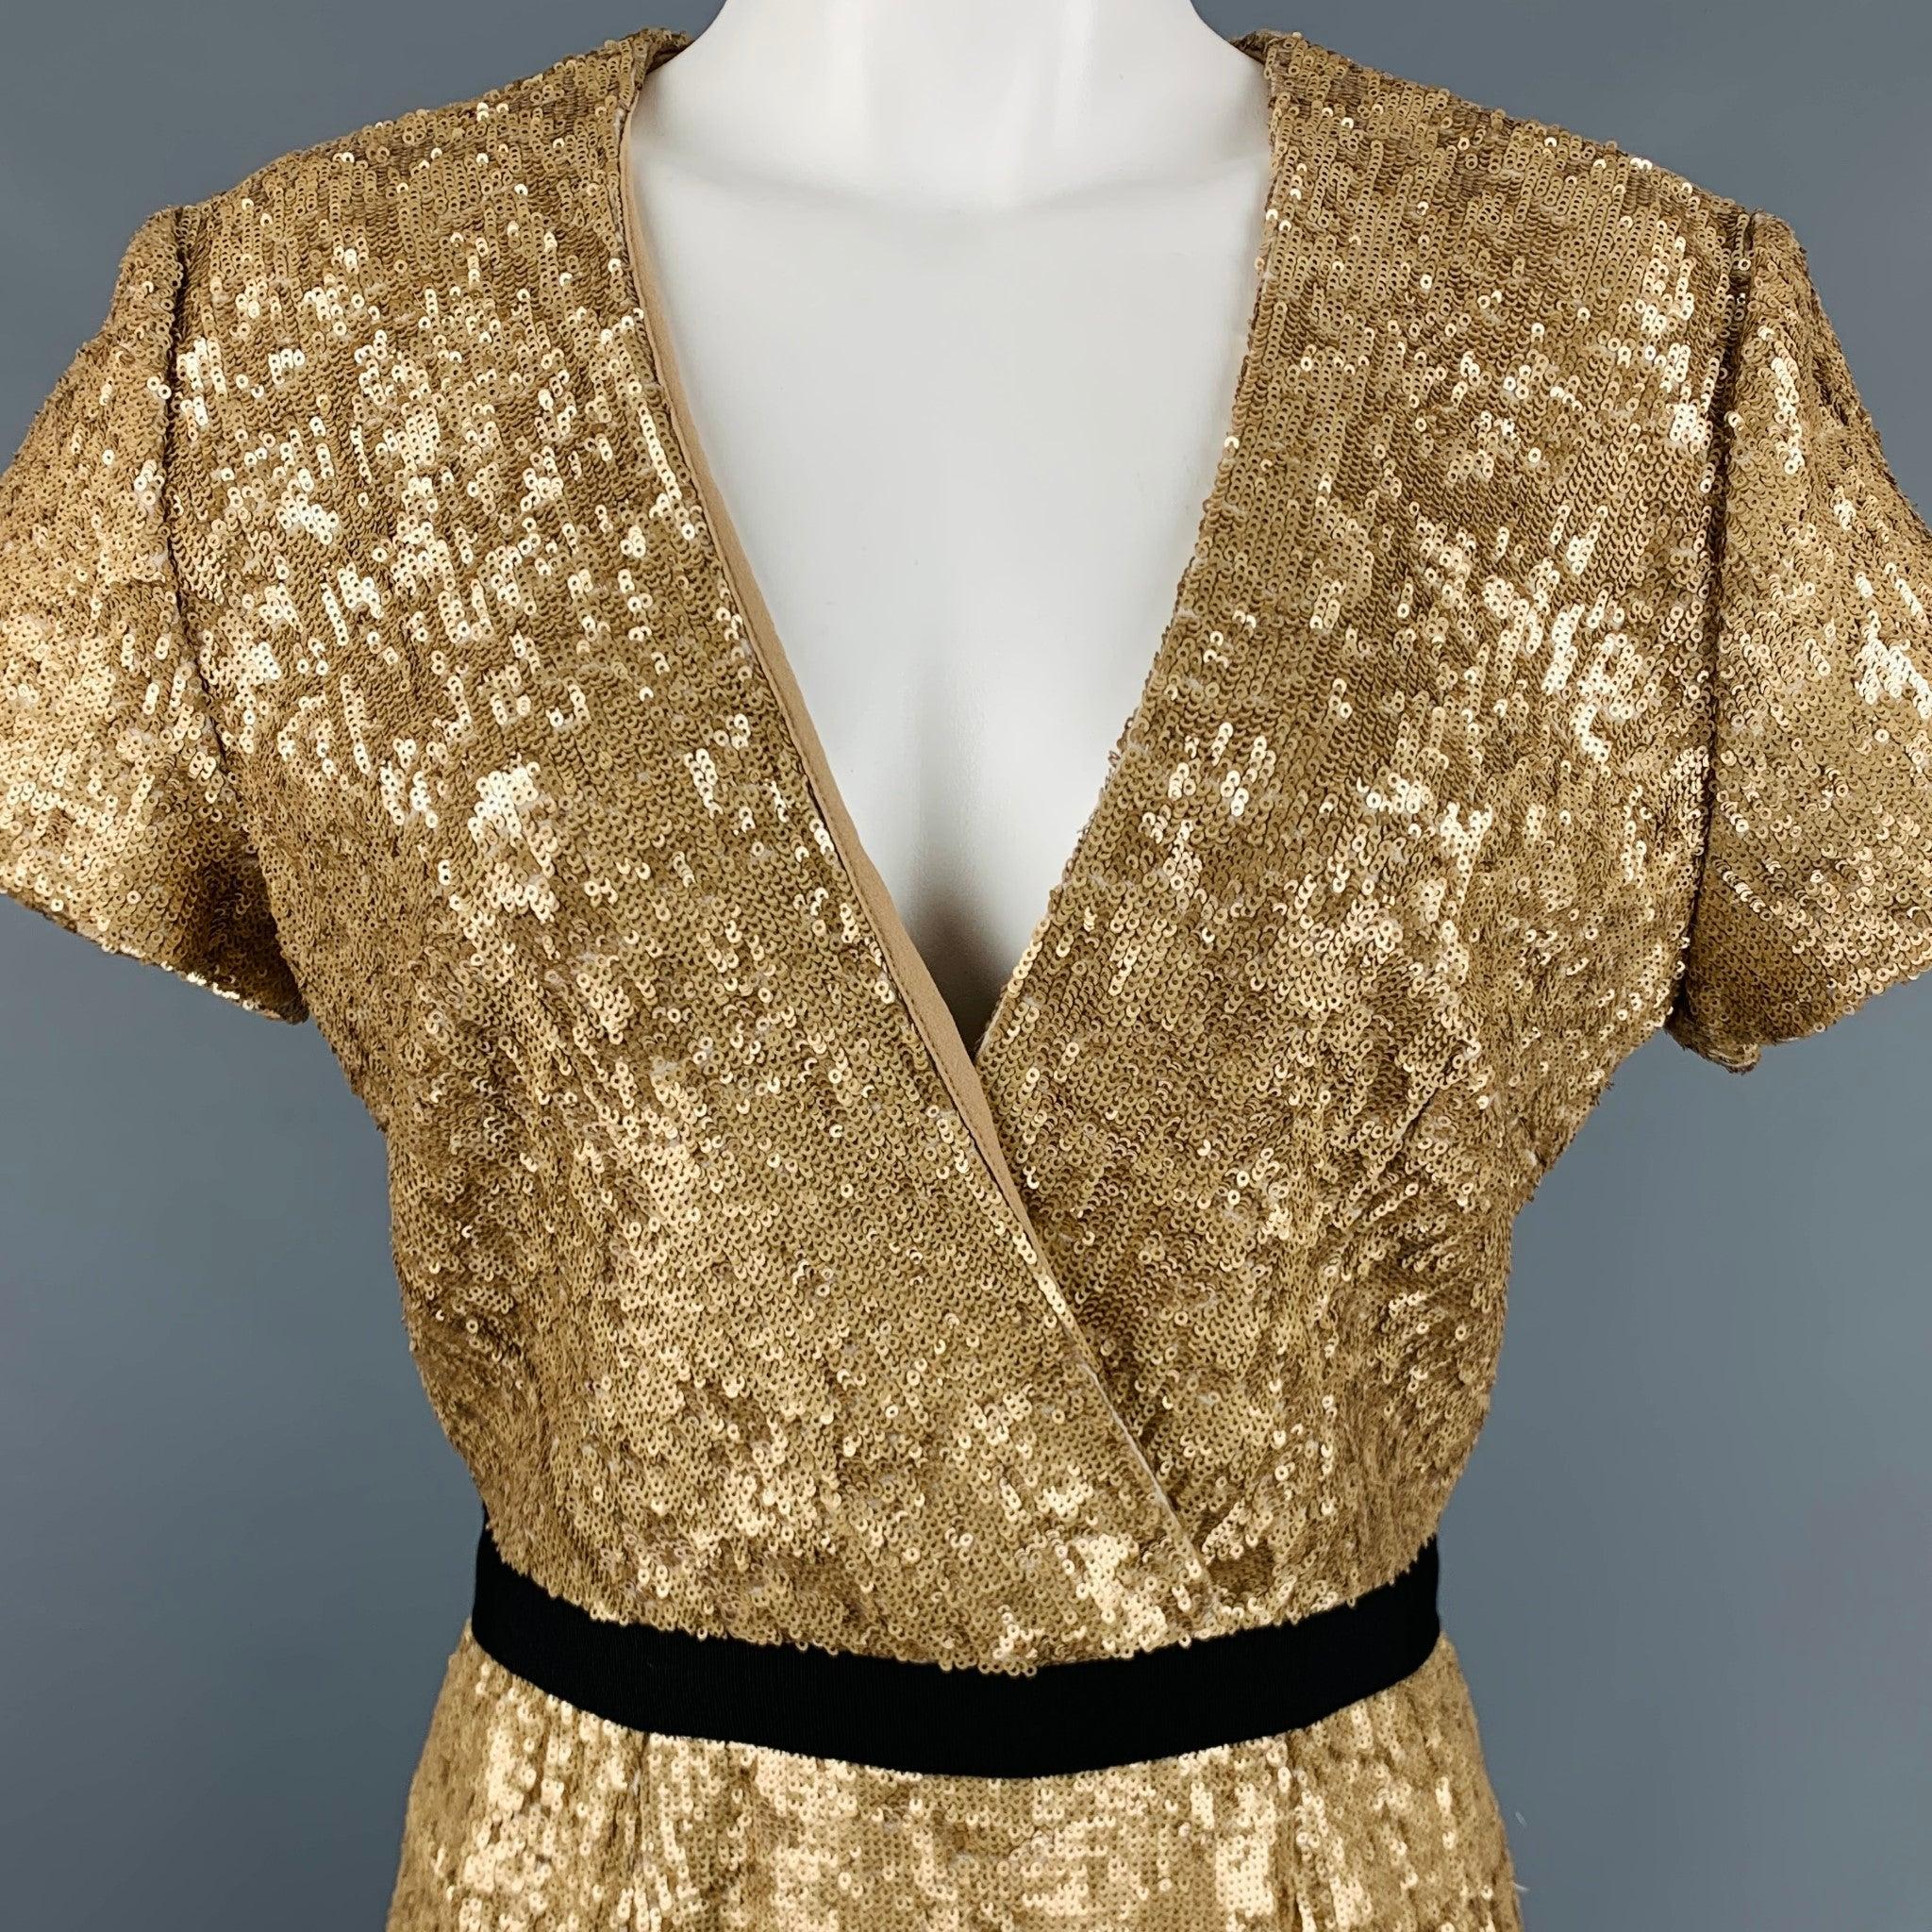 BURBERRY LONDON cocktail dress
in a gold viscose blend fabric featuring all over sequins, black contrast ribbon waistband, short sleeves, V-neck, and a back zipper closure.Very Good Pre-Owned Condition. Minor signs of wear. 

Marked:  8